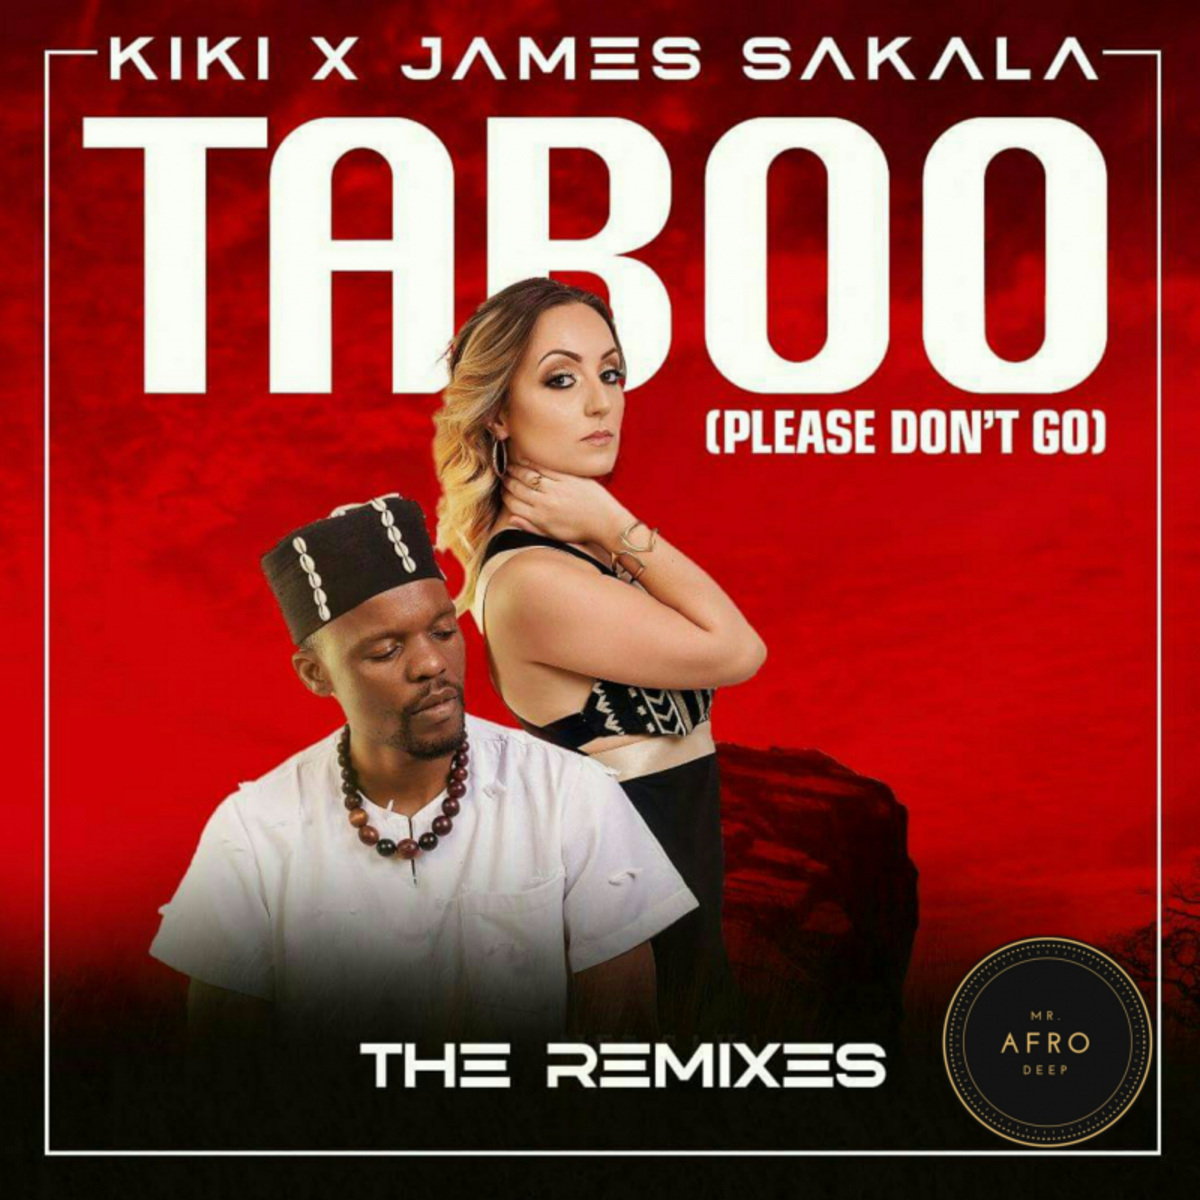 Kiki - Taboo (Please Don't Go) (The Remixes) / Mr. Afro Deep